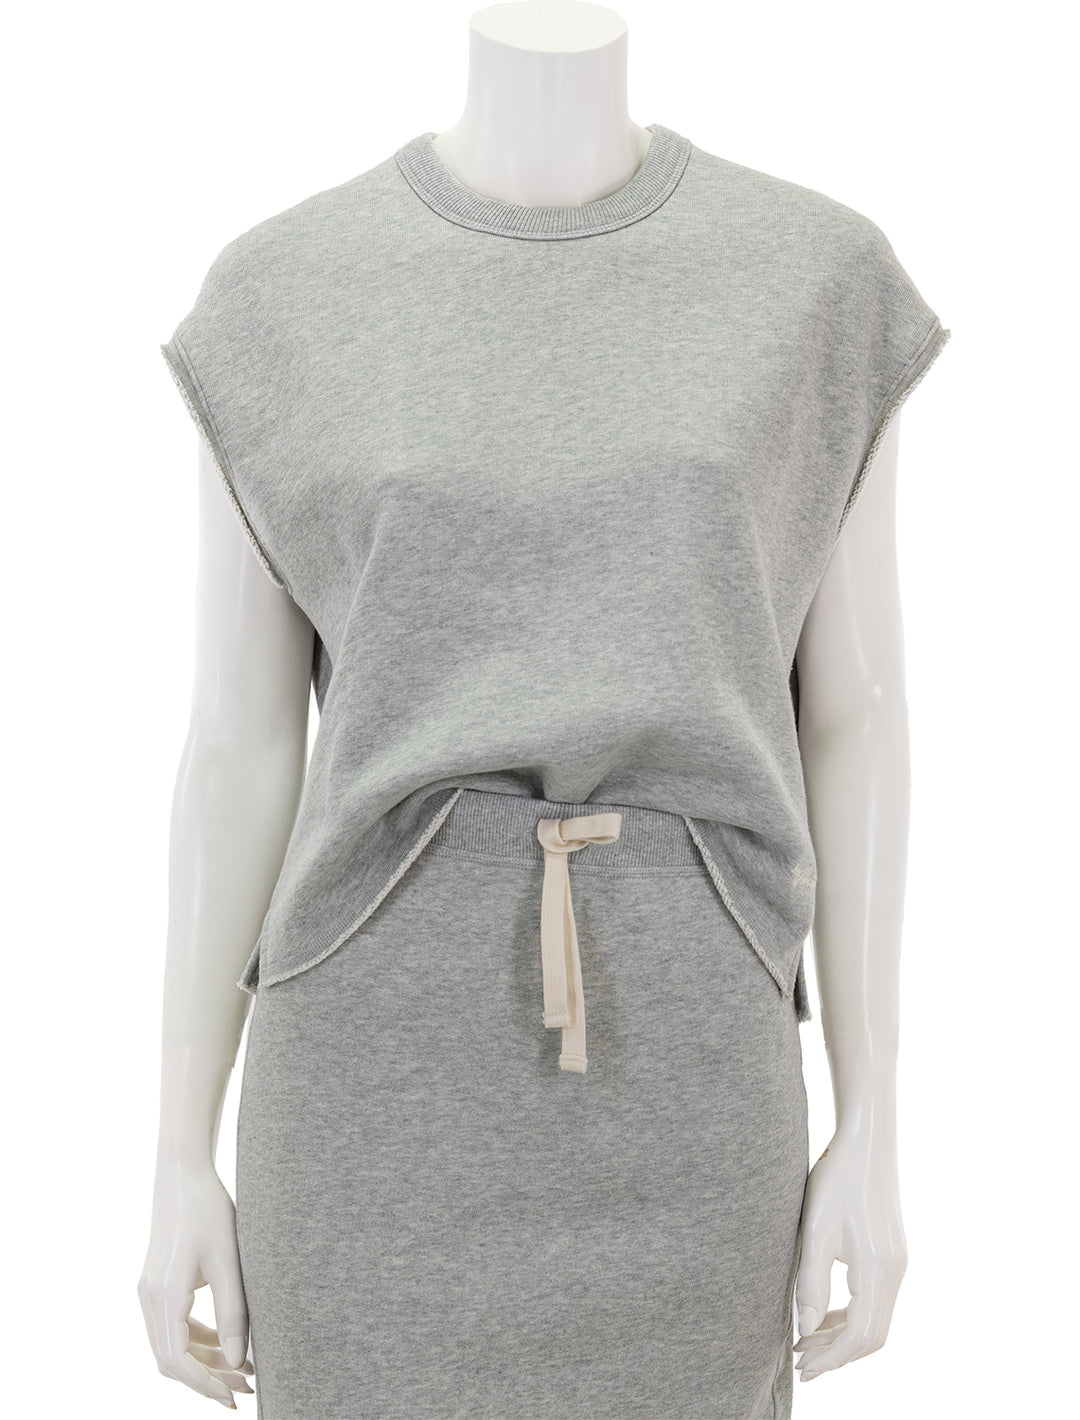 Front view of Rag & Bone's vintage terry muscle tee in heather grey.